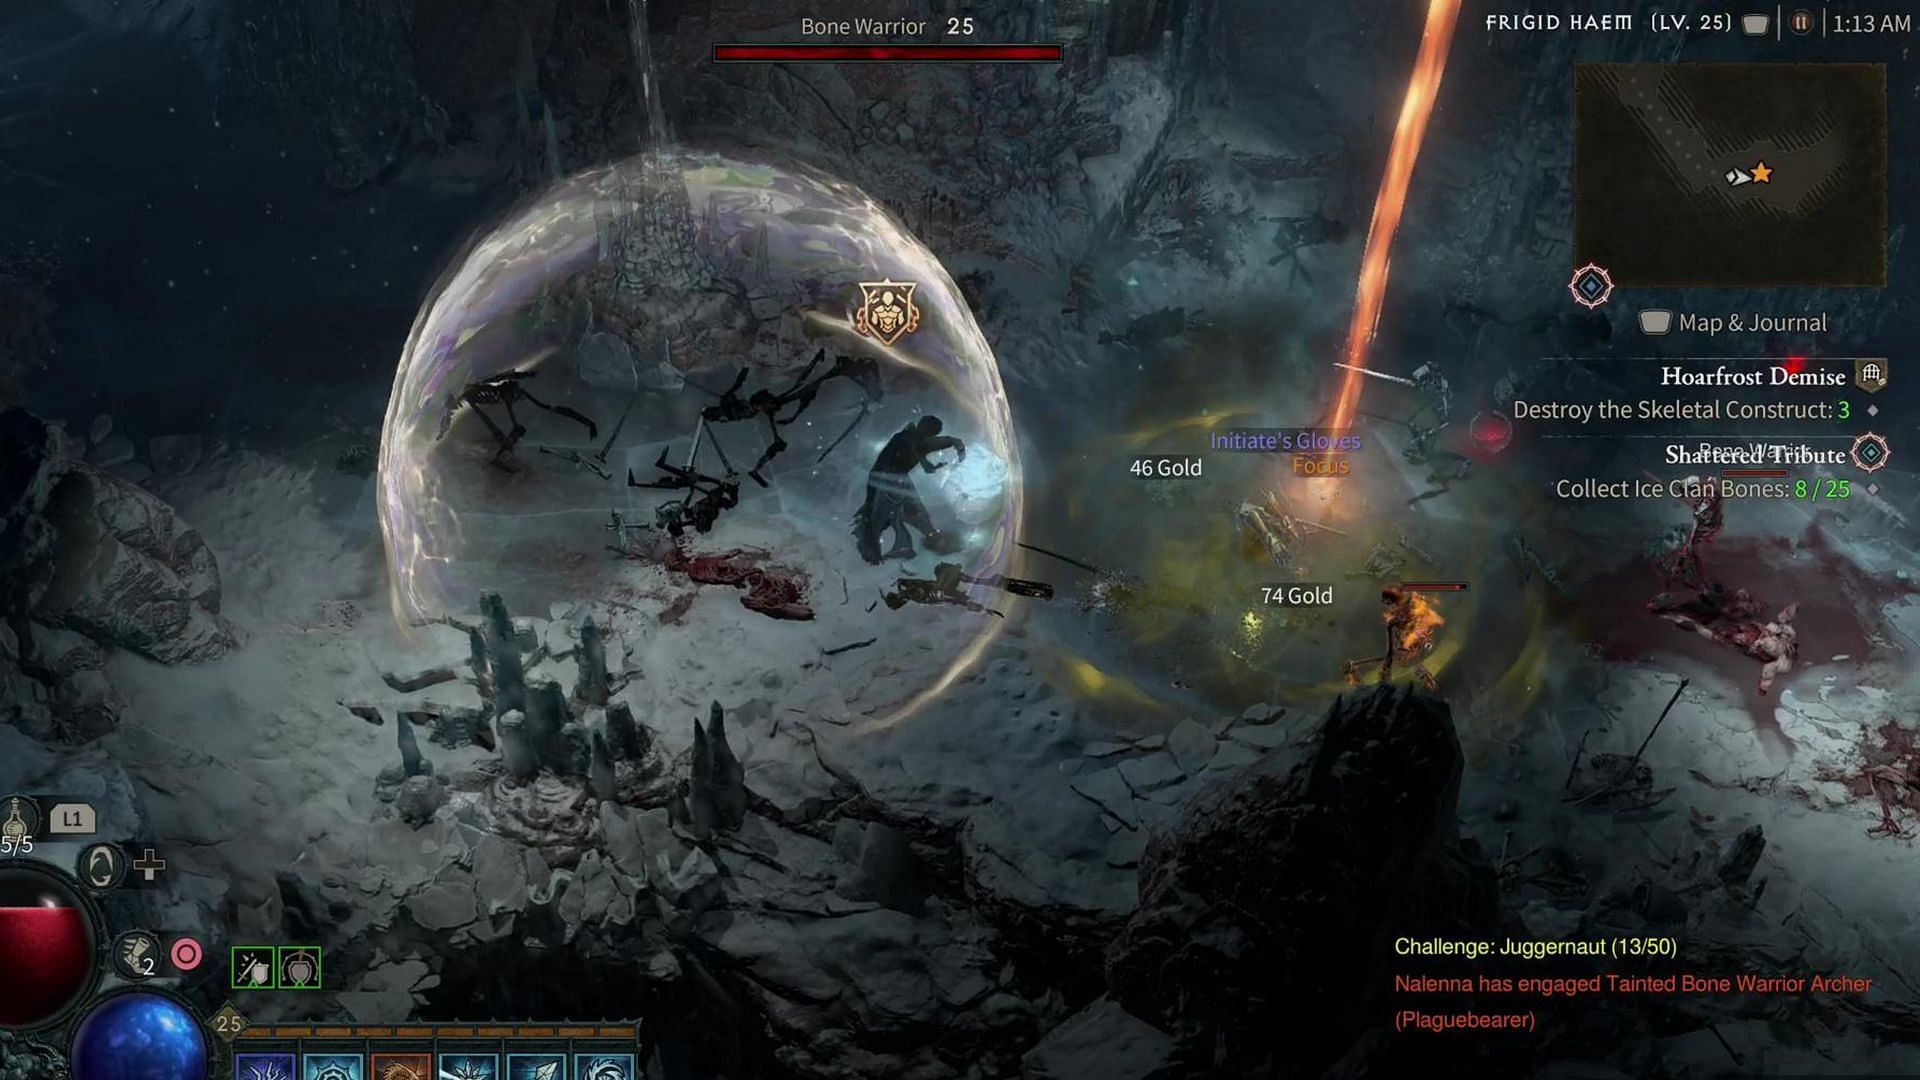 Diablo IV Will Release Story Updates Every Three Months